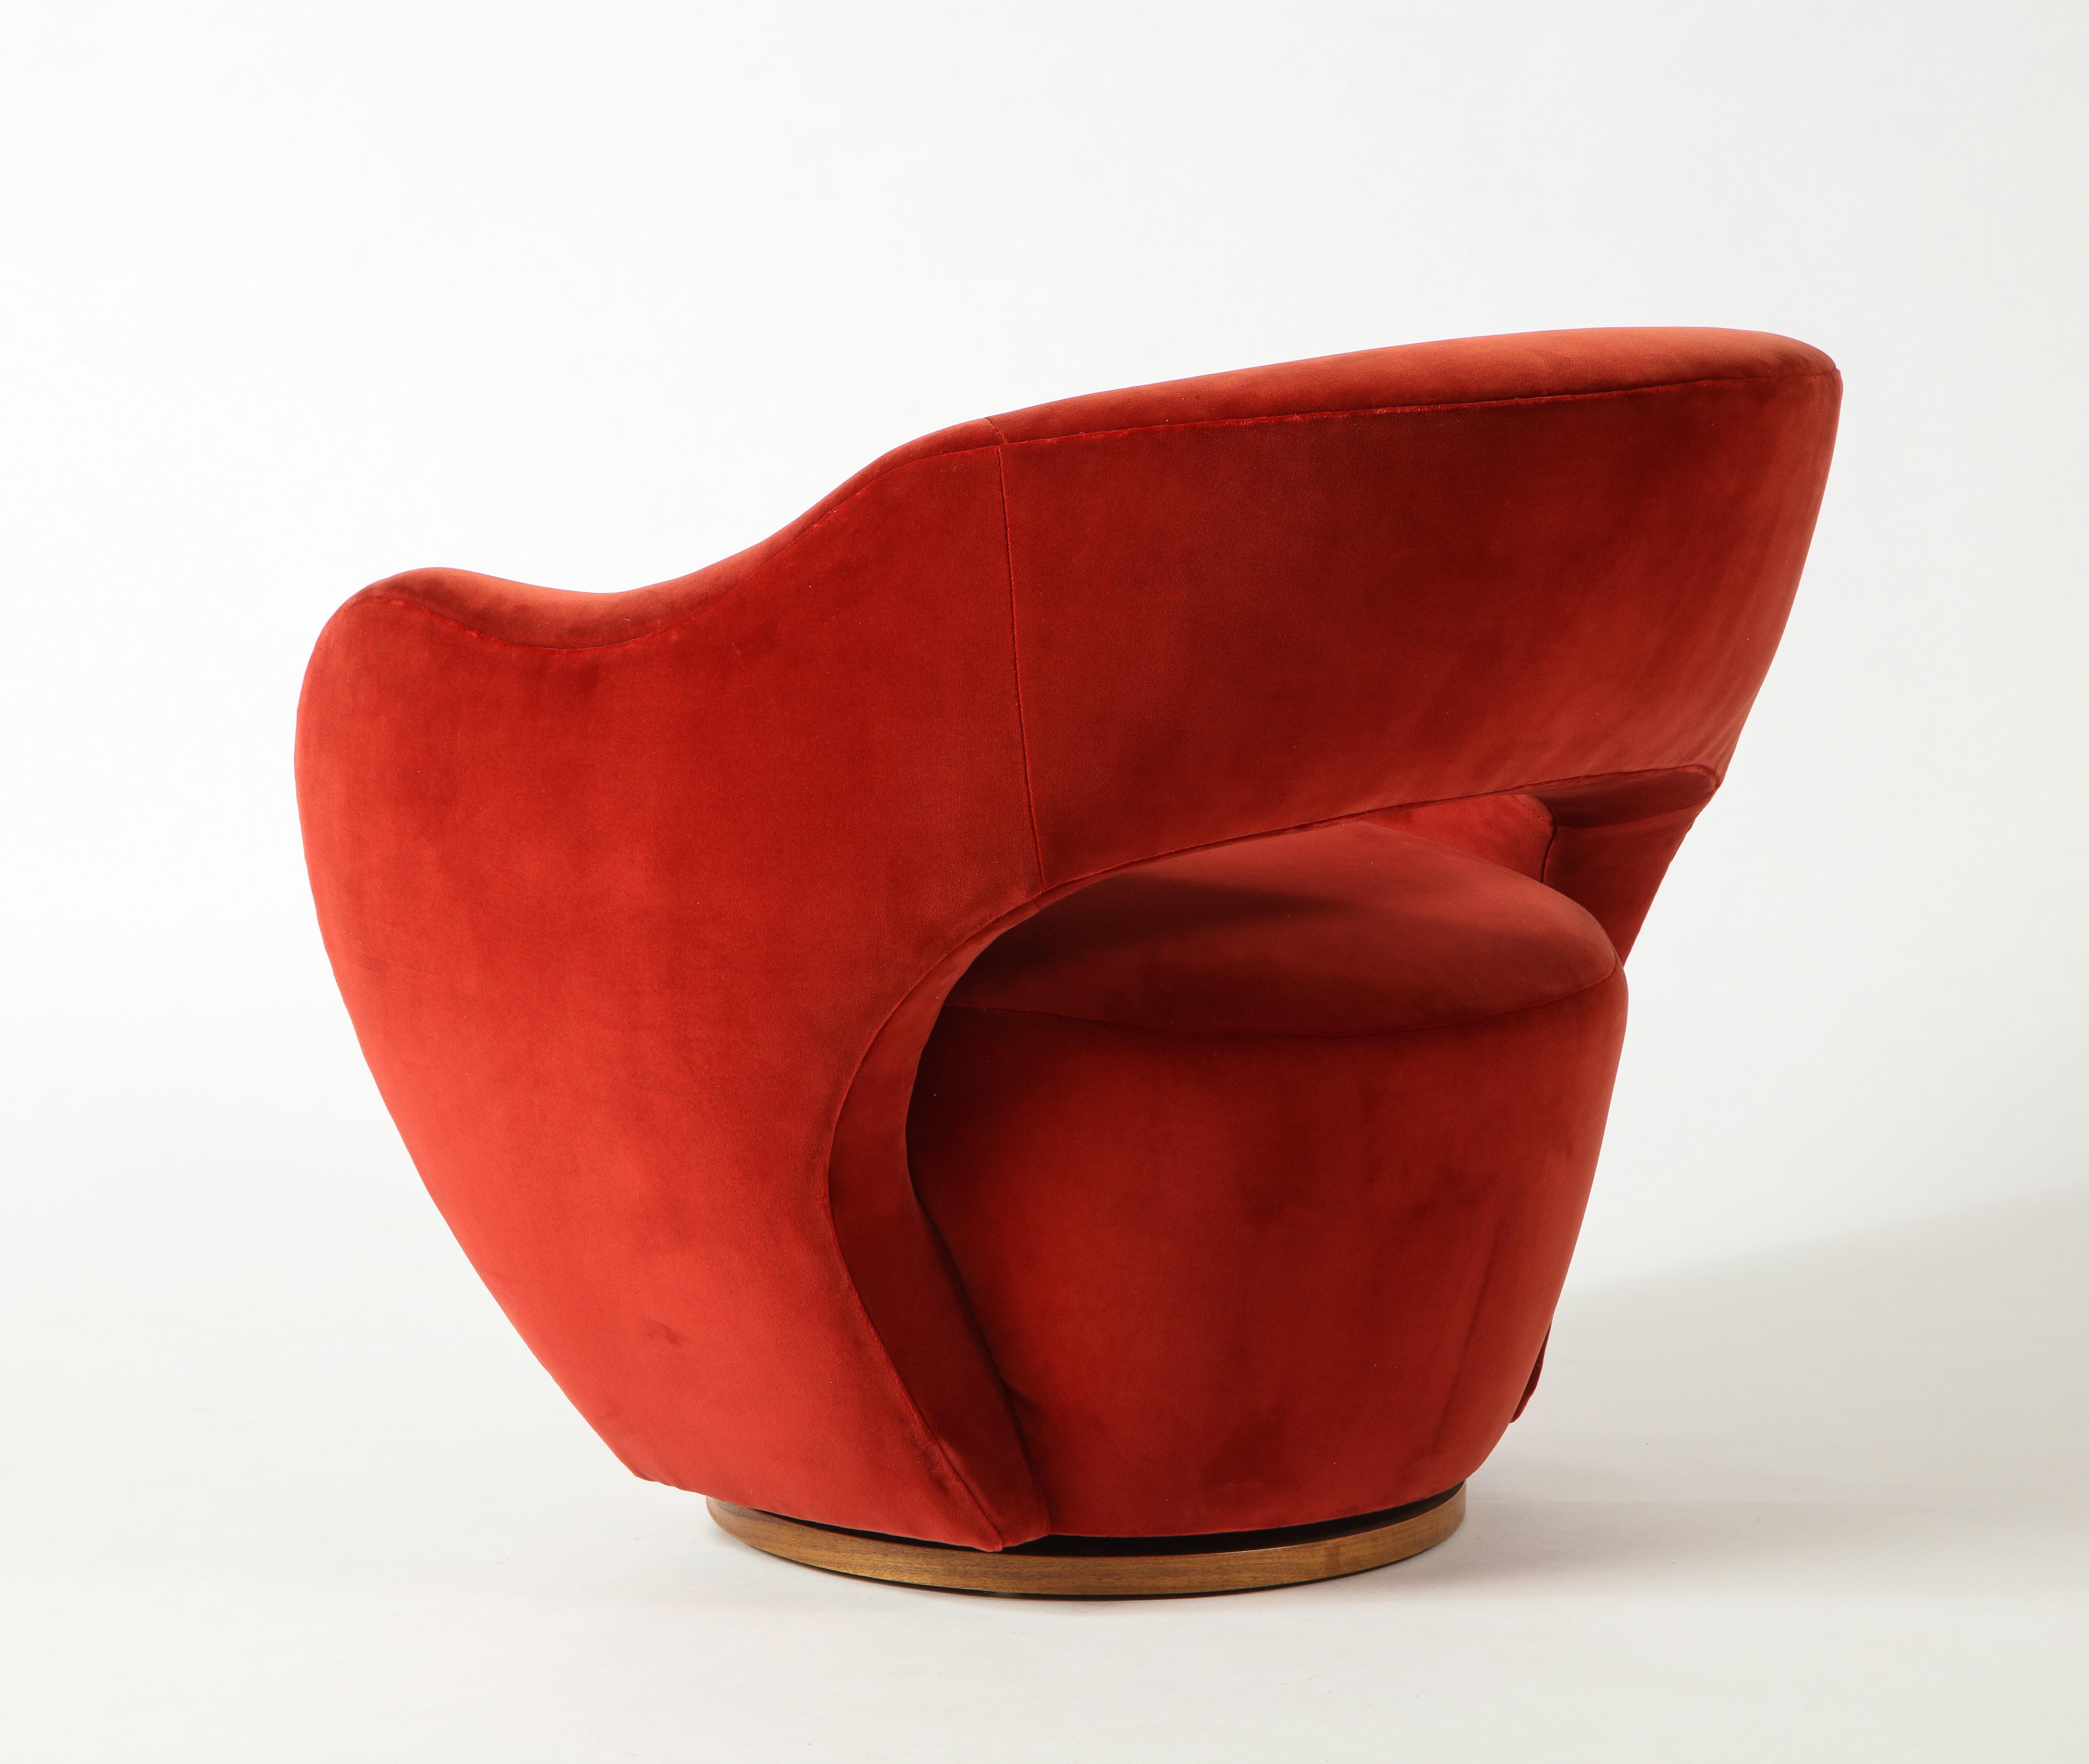 Contemporary Vladimir Kagan Wysiwyg Chair with Red Upholstery & Natural Walnut Swivel Base